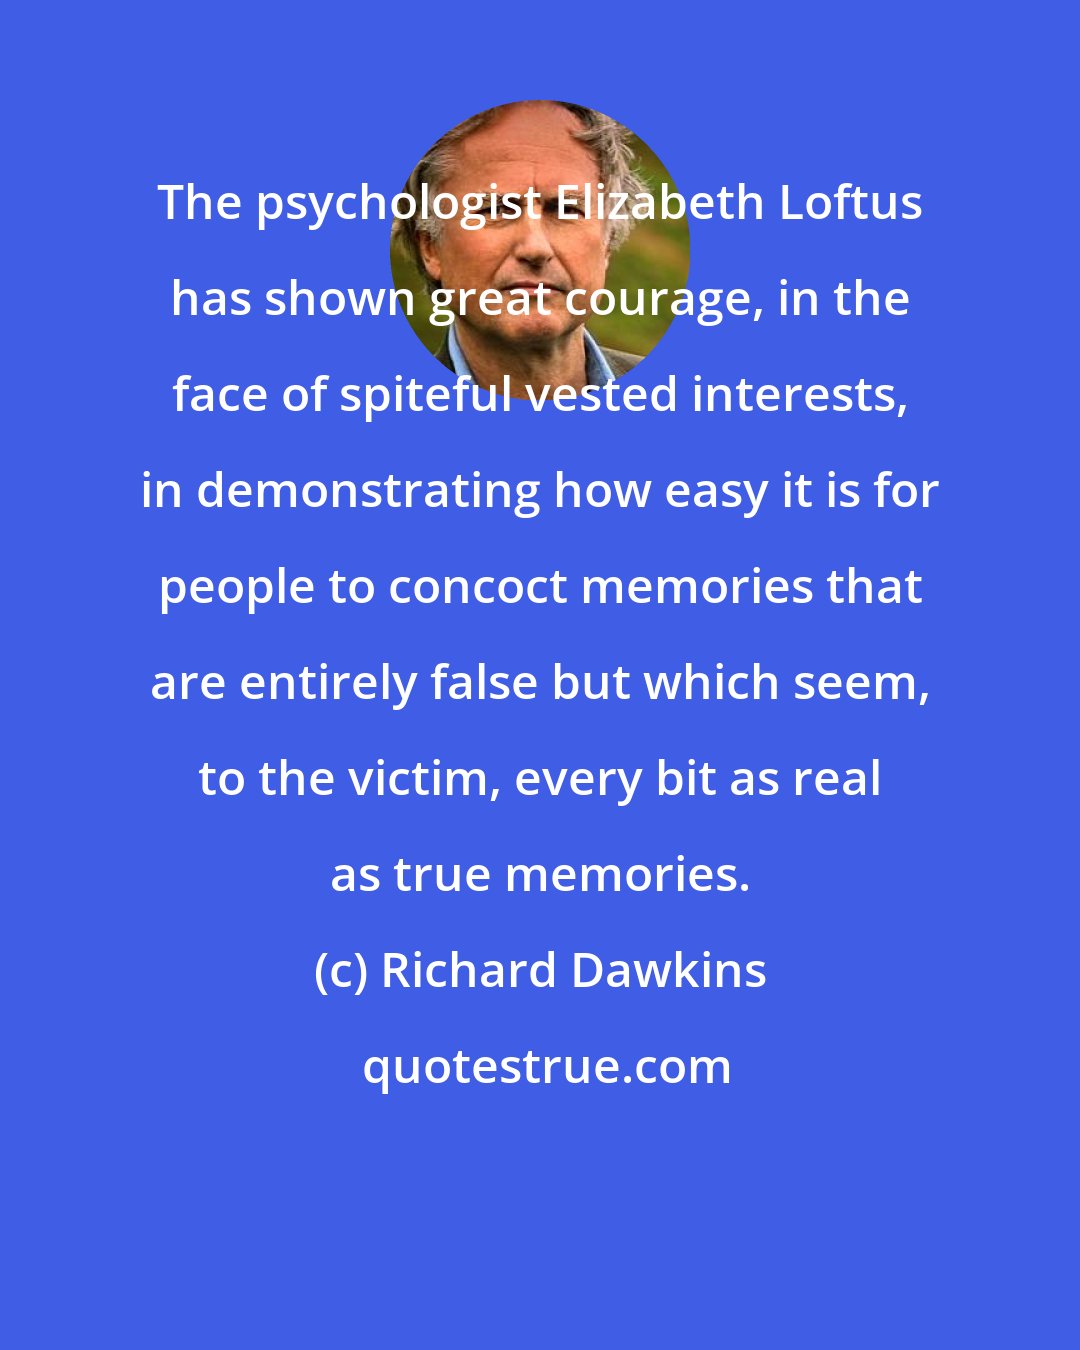 Richard Dawkins: The psychologist Elizabeth Loftus has shown great courage, in the face of spiteful vested interests, in demonstrating how easy it is for people to concoct memories that are entirely false but which seem, to the victim, every bit as real as true memories.